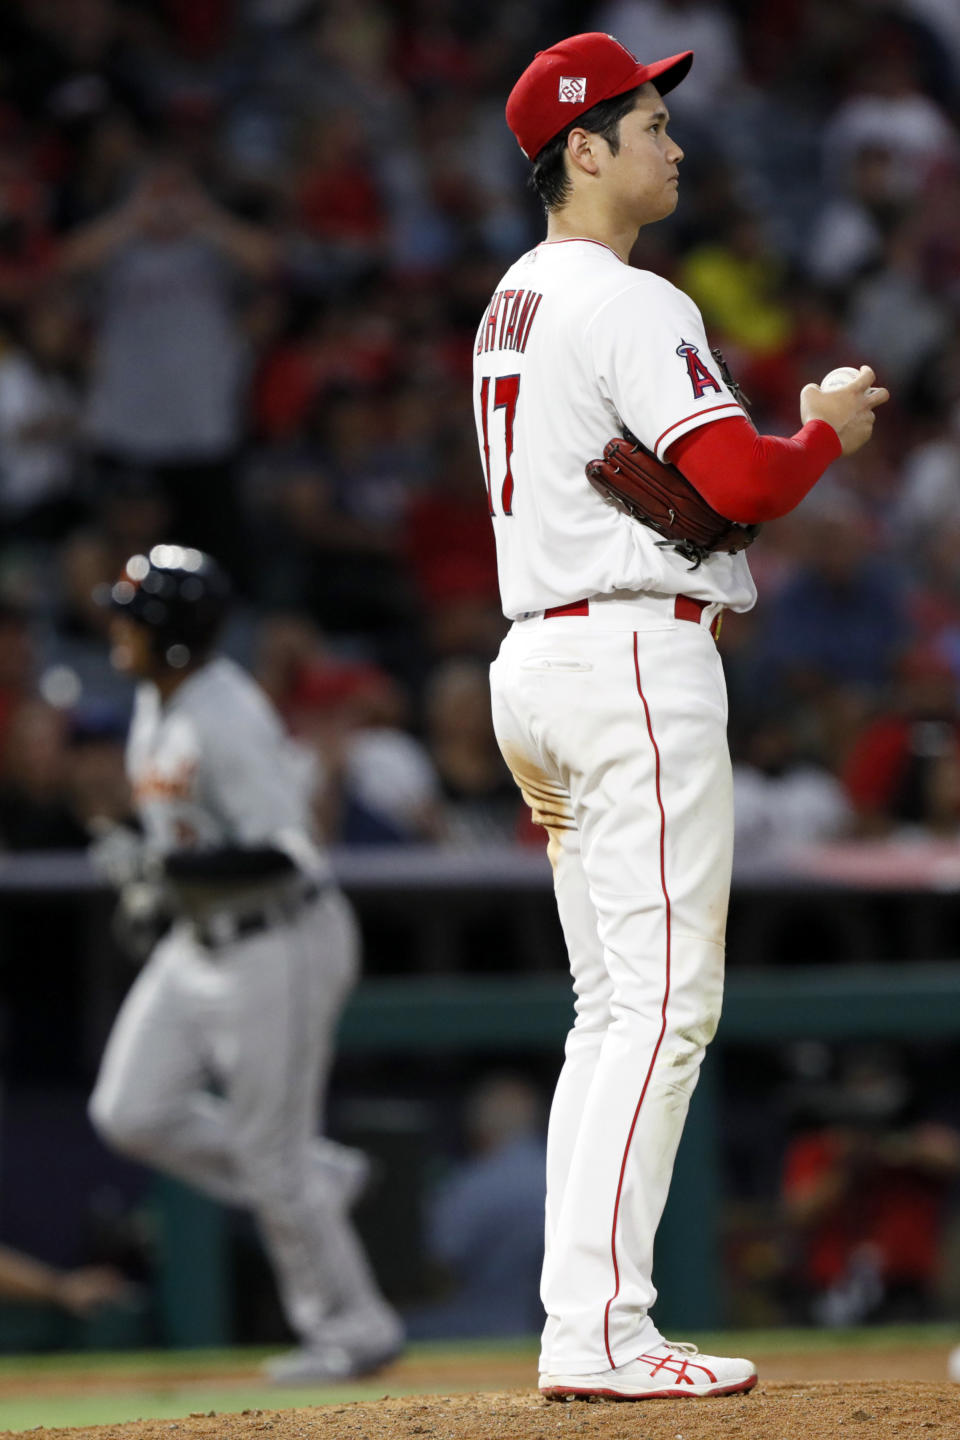 Los Angeles Angels staring pitcher Shohei Ohtani waits Detroit Tigers' Jonathan Schoop rounds third after hitting a solo home run during the sixth inning of a baseball game in Anaheim, Calif., Thursday, June 17, 2021. (AP Photo/Alex Gallardo)